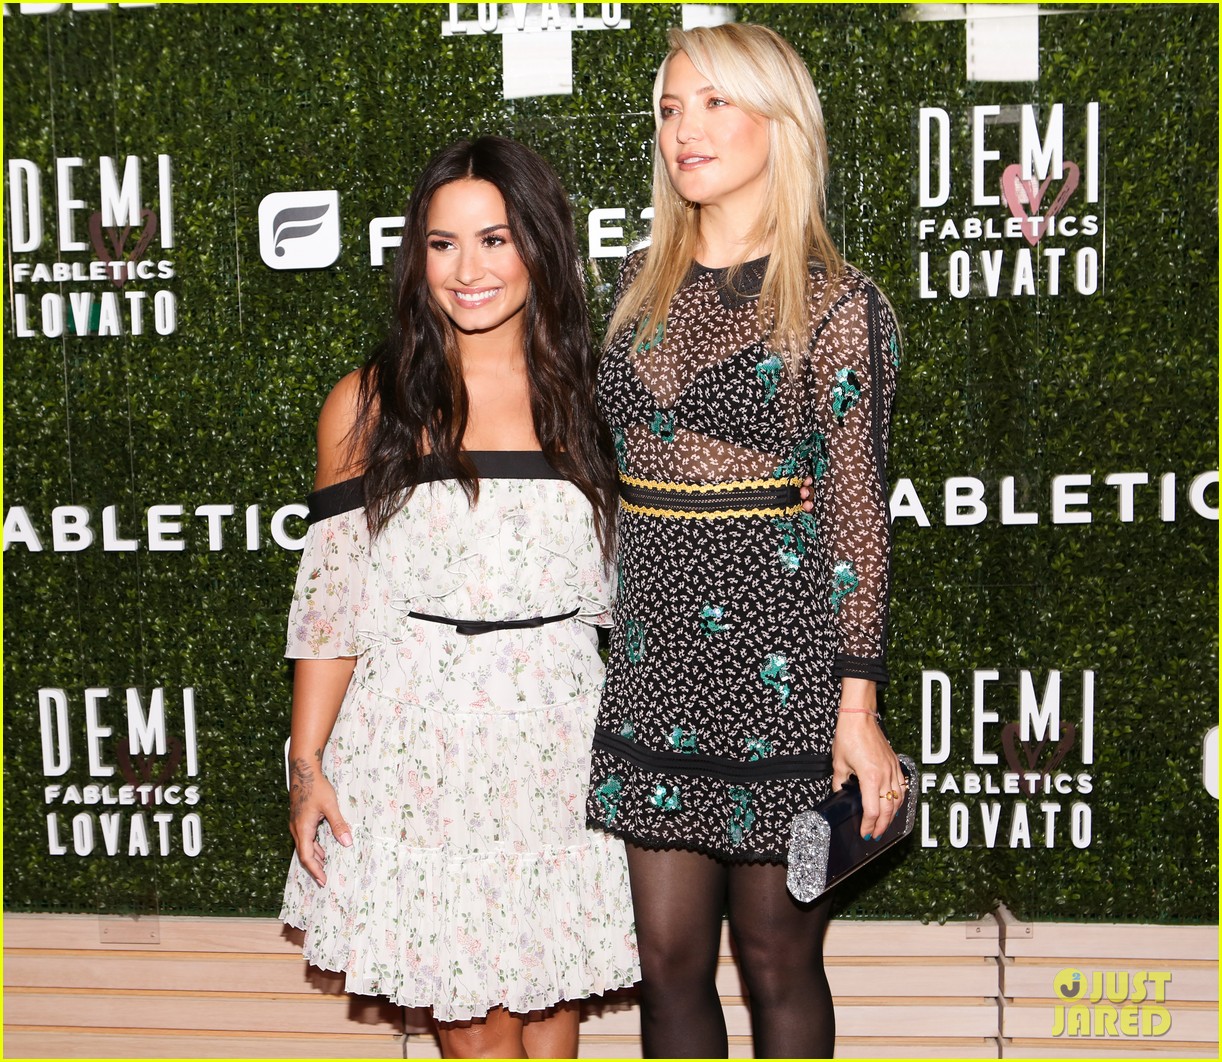 demi lovato celebrates the launch of her fabletics collection04